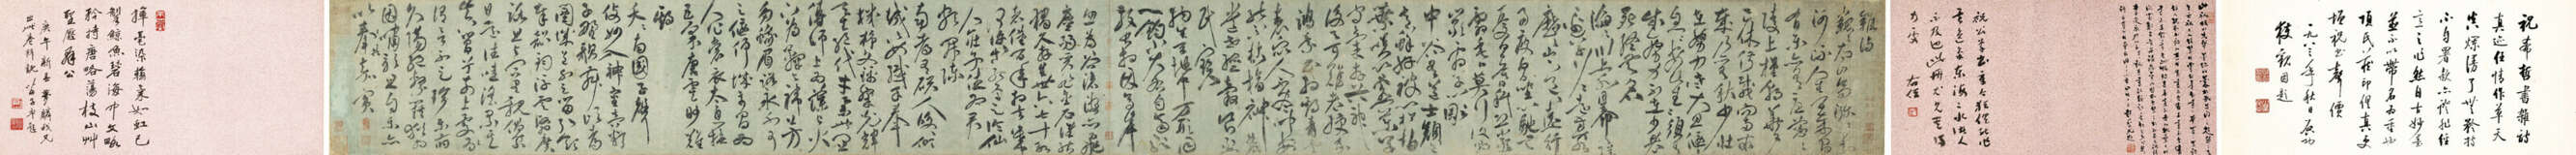 WITH SIGNATURE OF ZHU YUNMING (16TH CENTURY) - фото 2